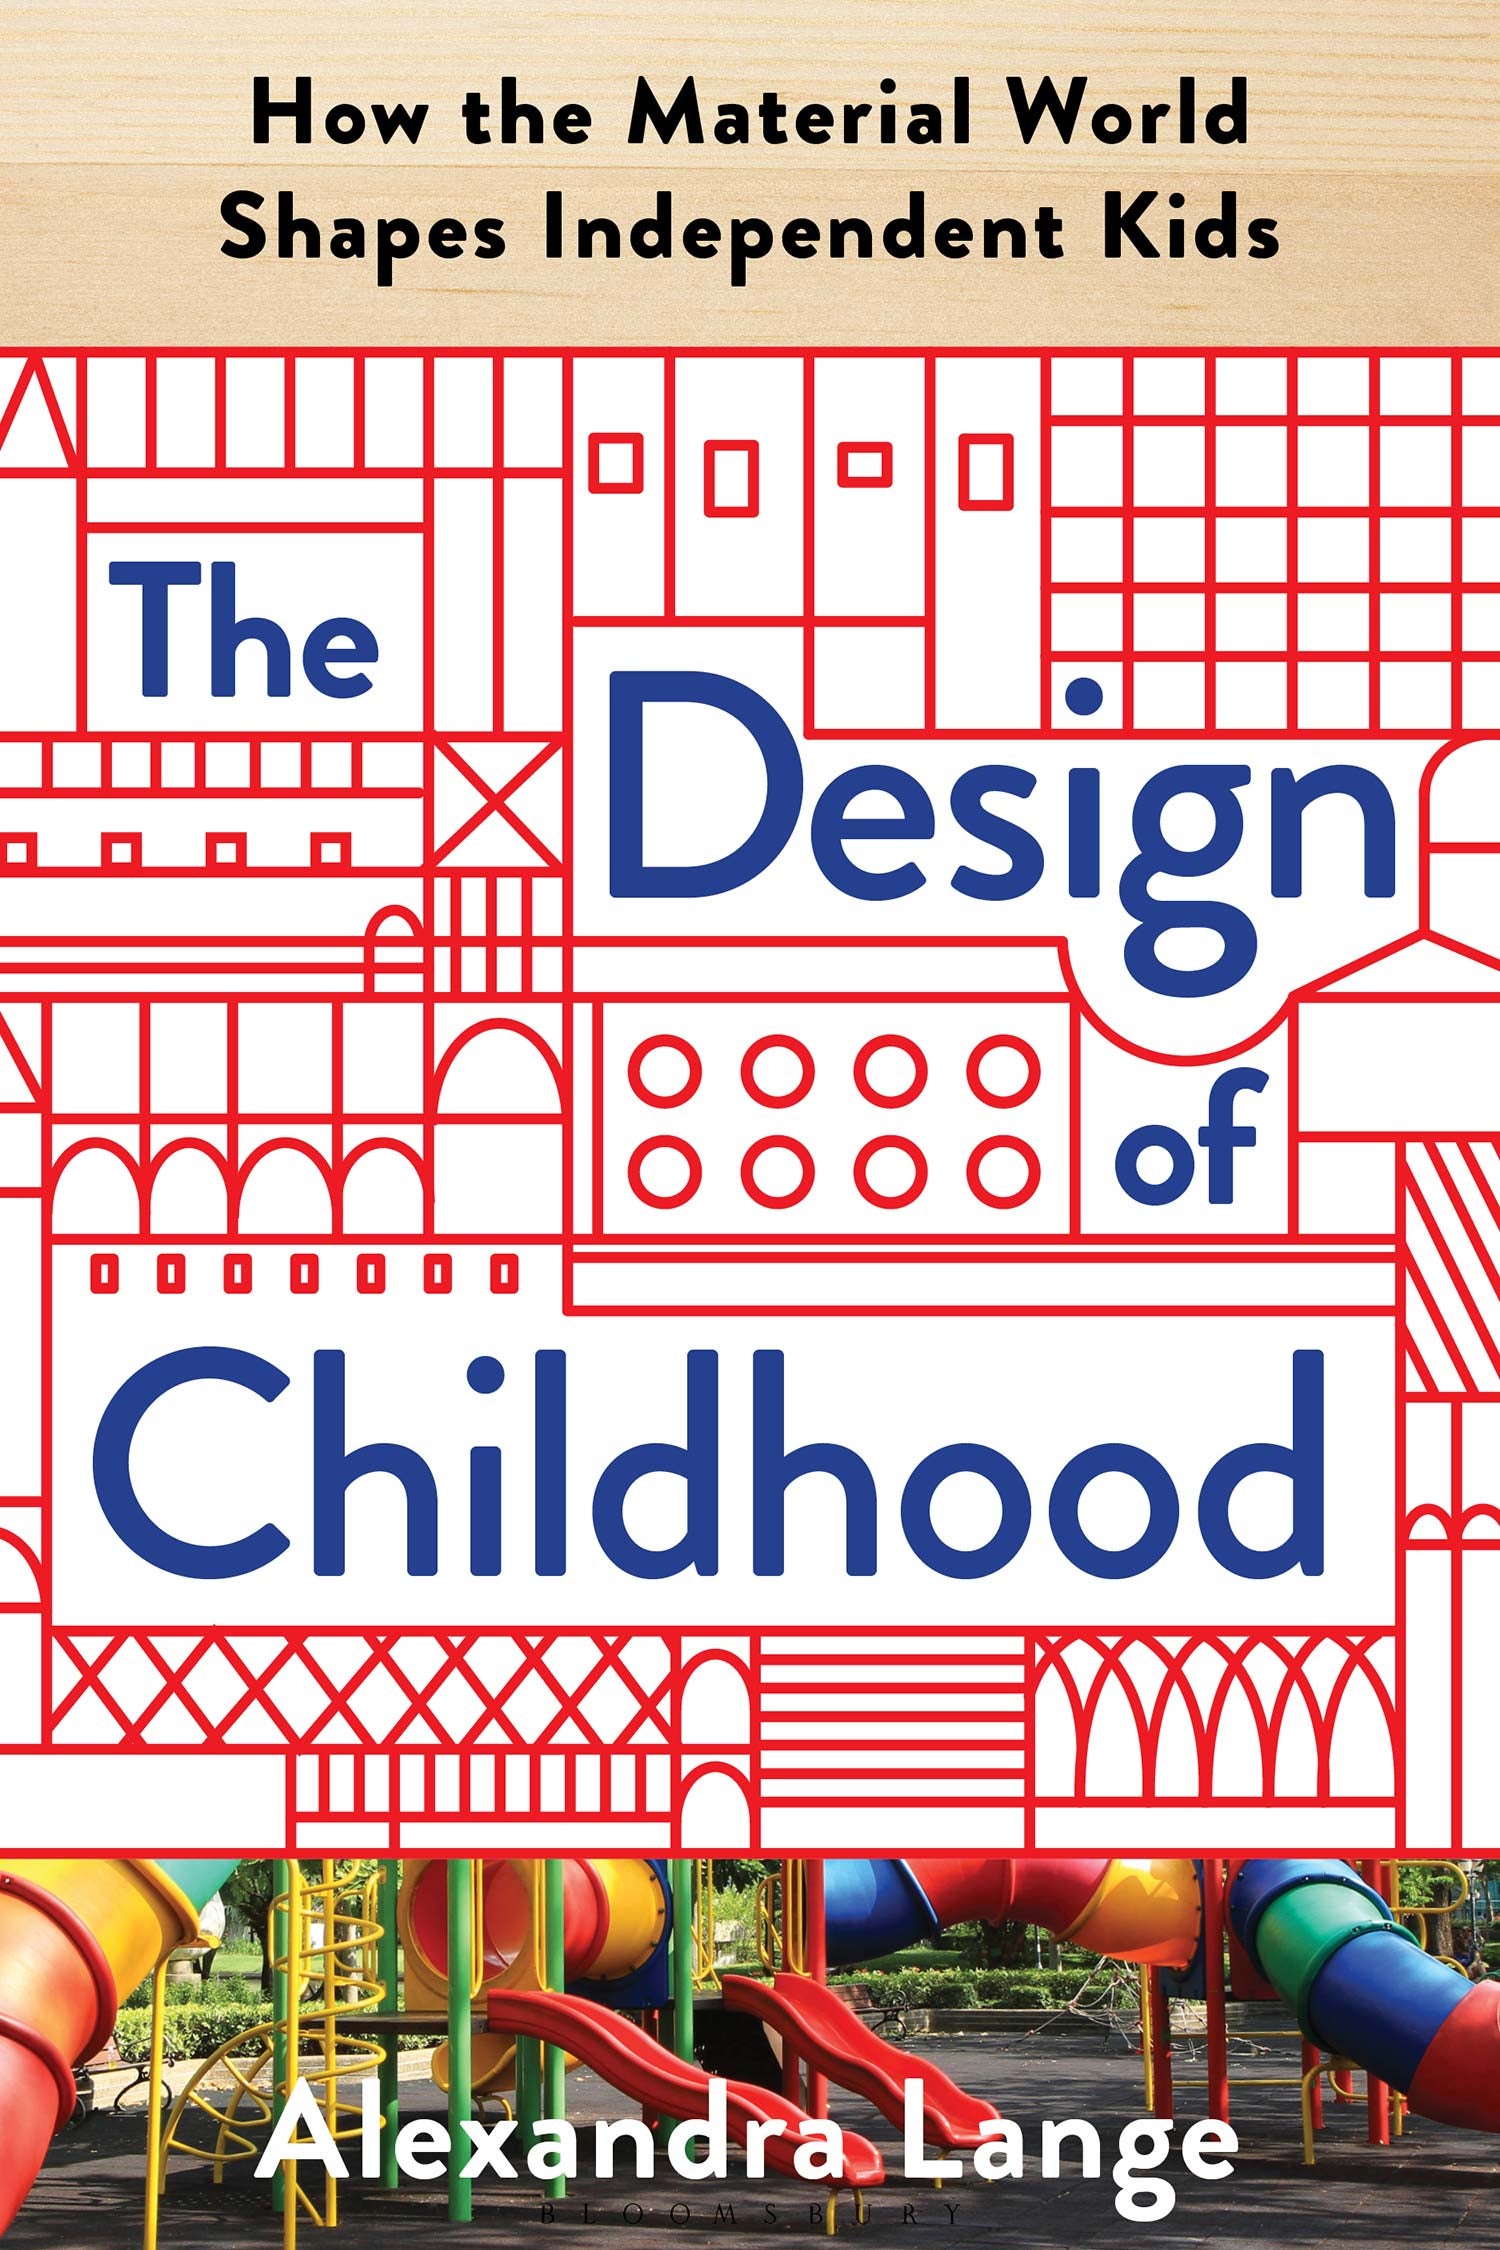 Book cover for The Design of Childhood by Alexandra Lange.